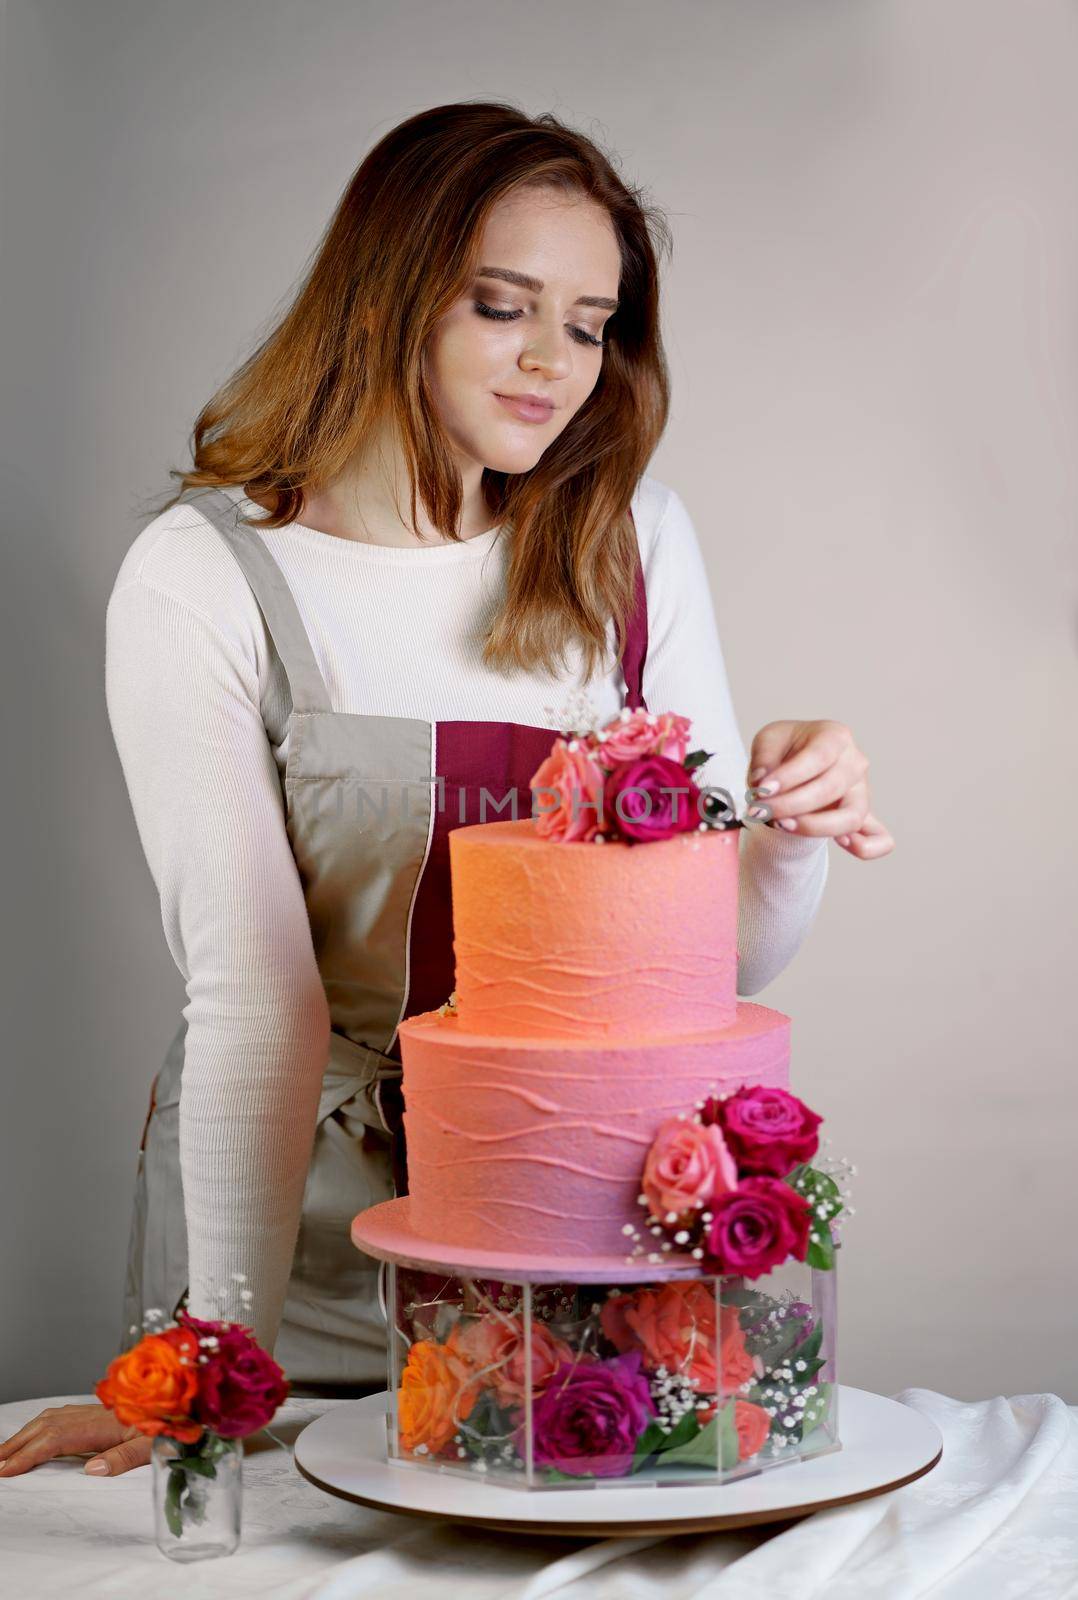 Beautiful girl confectioner in a working apron decorates a birthday cake with fresh flowers by aprilphoto